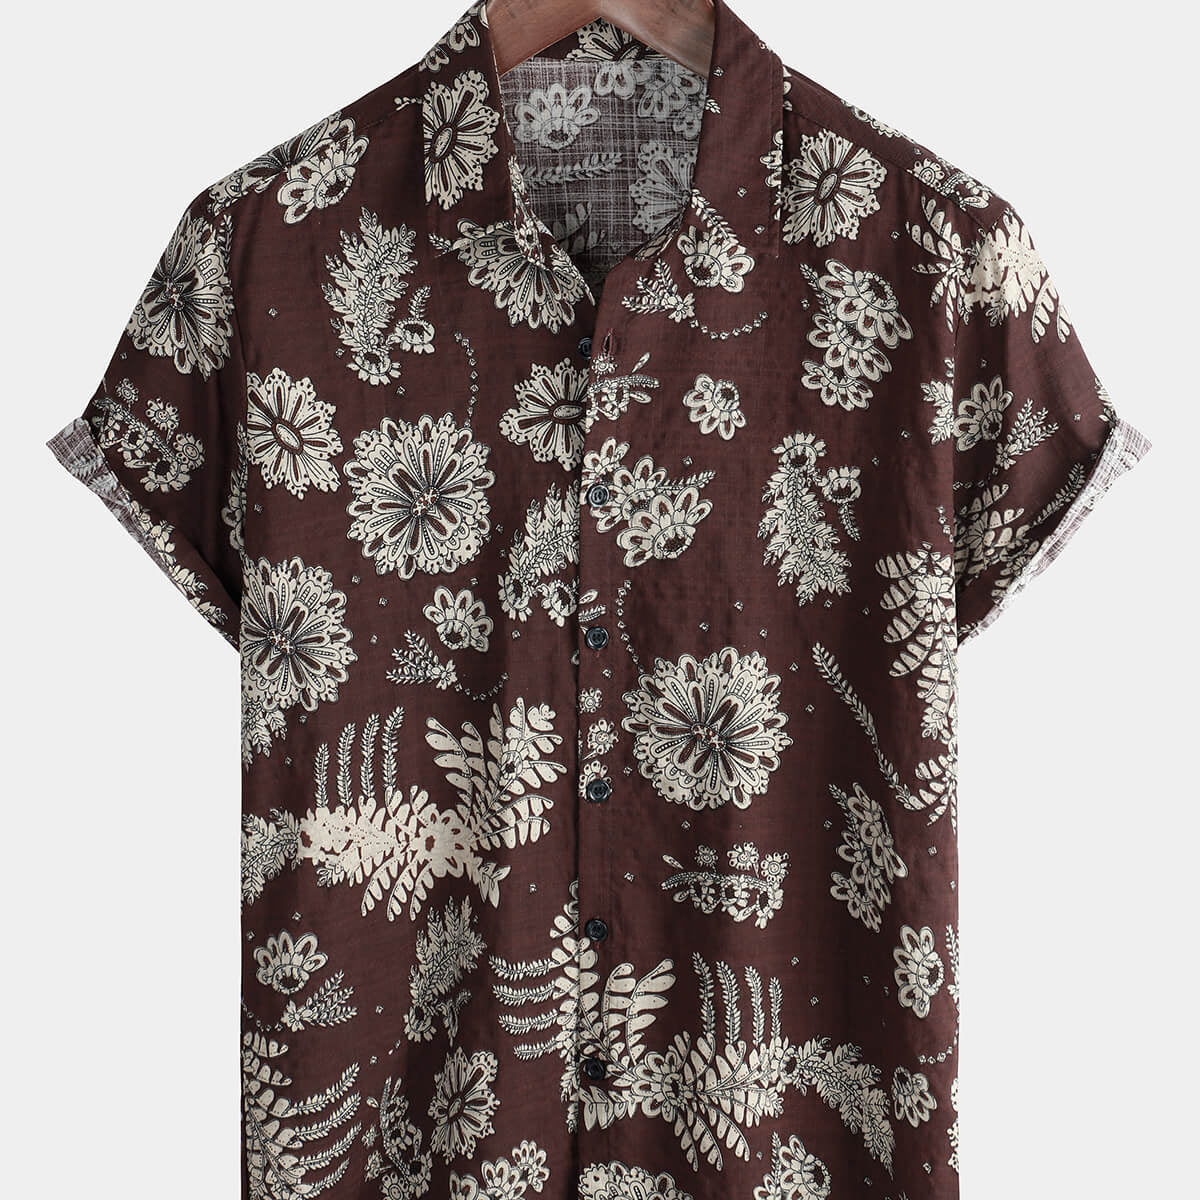 Men's Brown Floral Holiday Casual Beach Short Sleeve Button Up Shirt